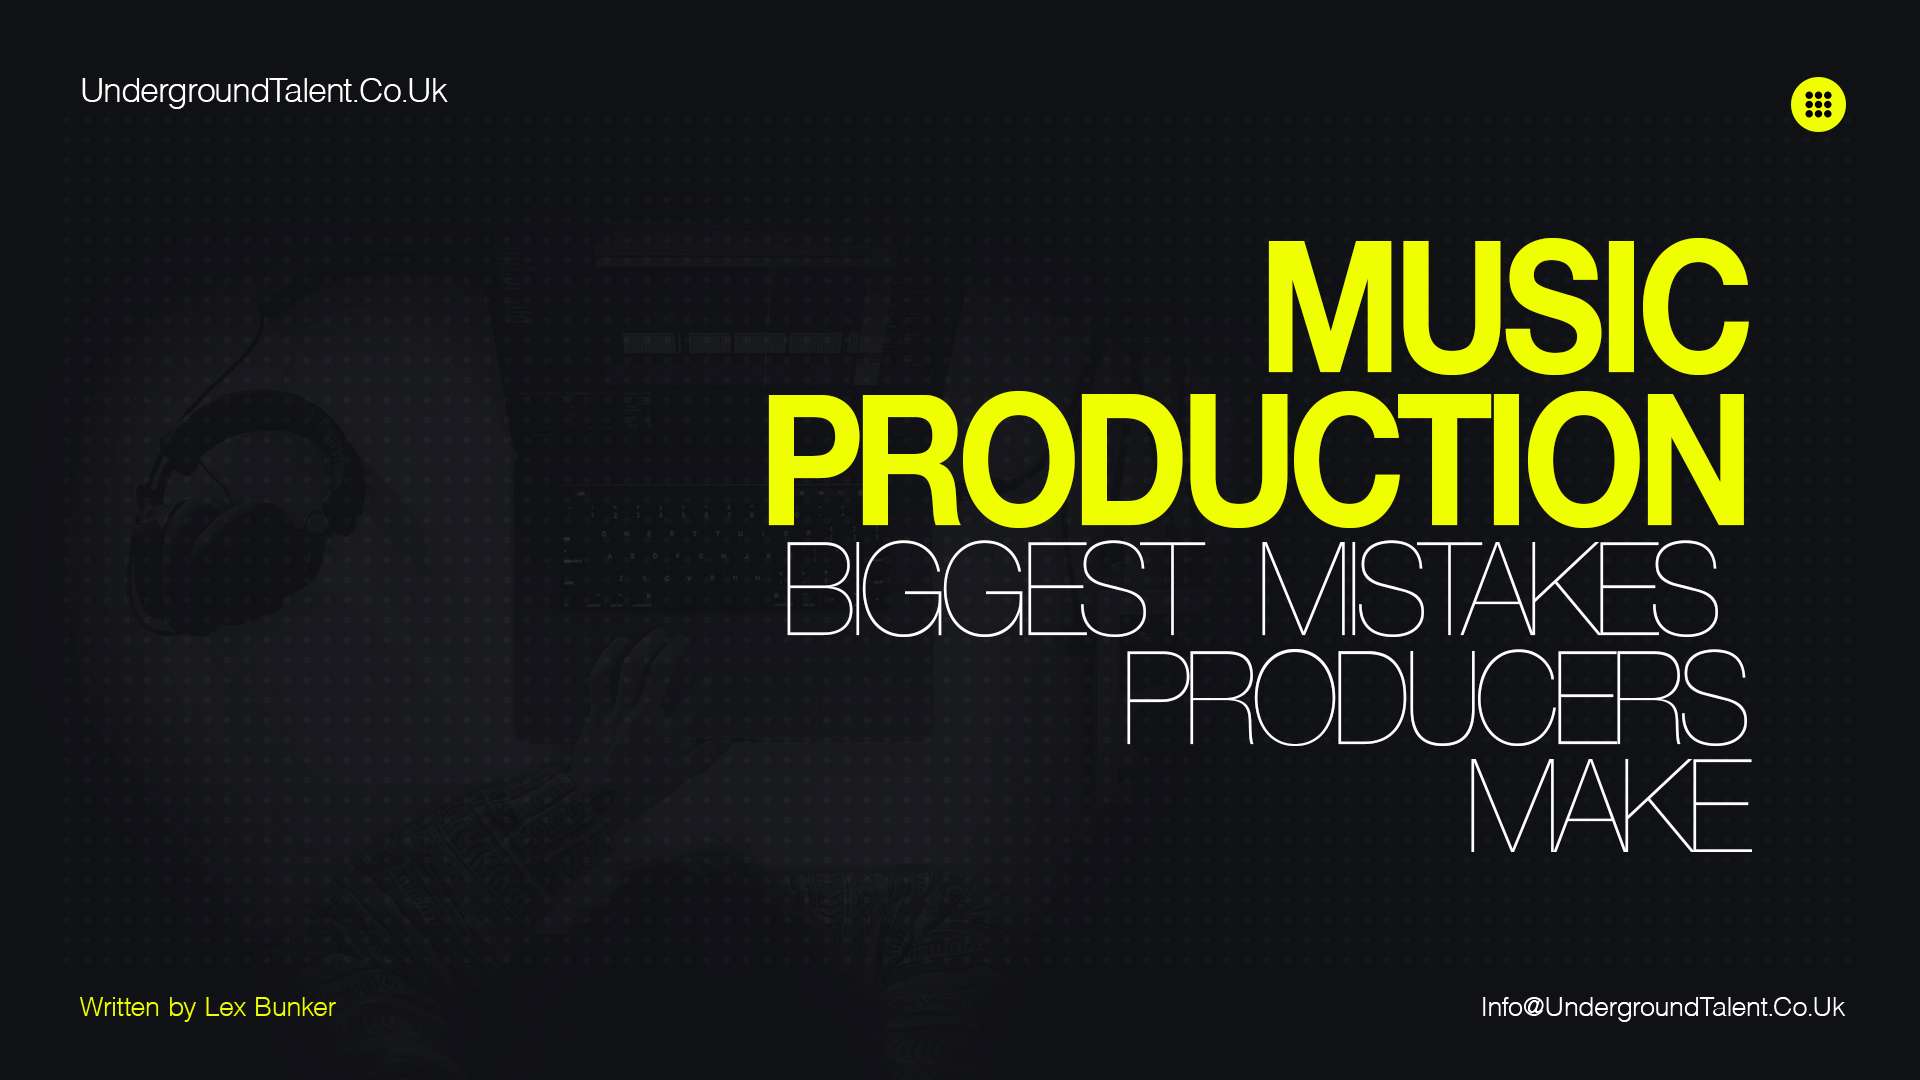 Electronic Music Production: Biggest Mistakes Producers Make